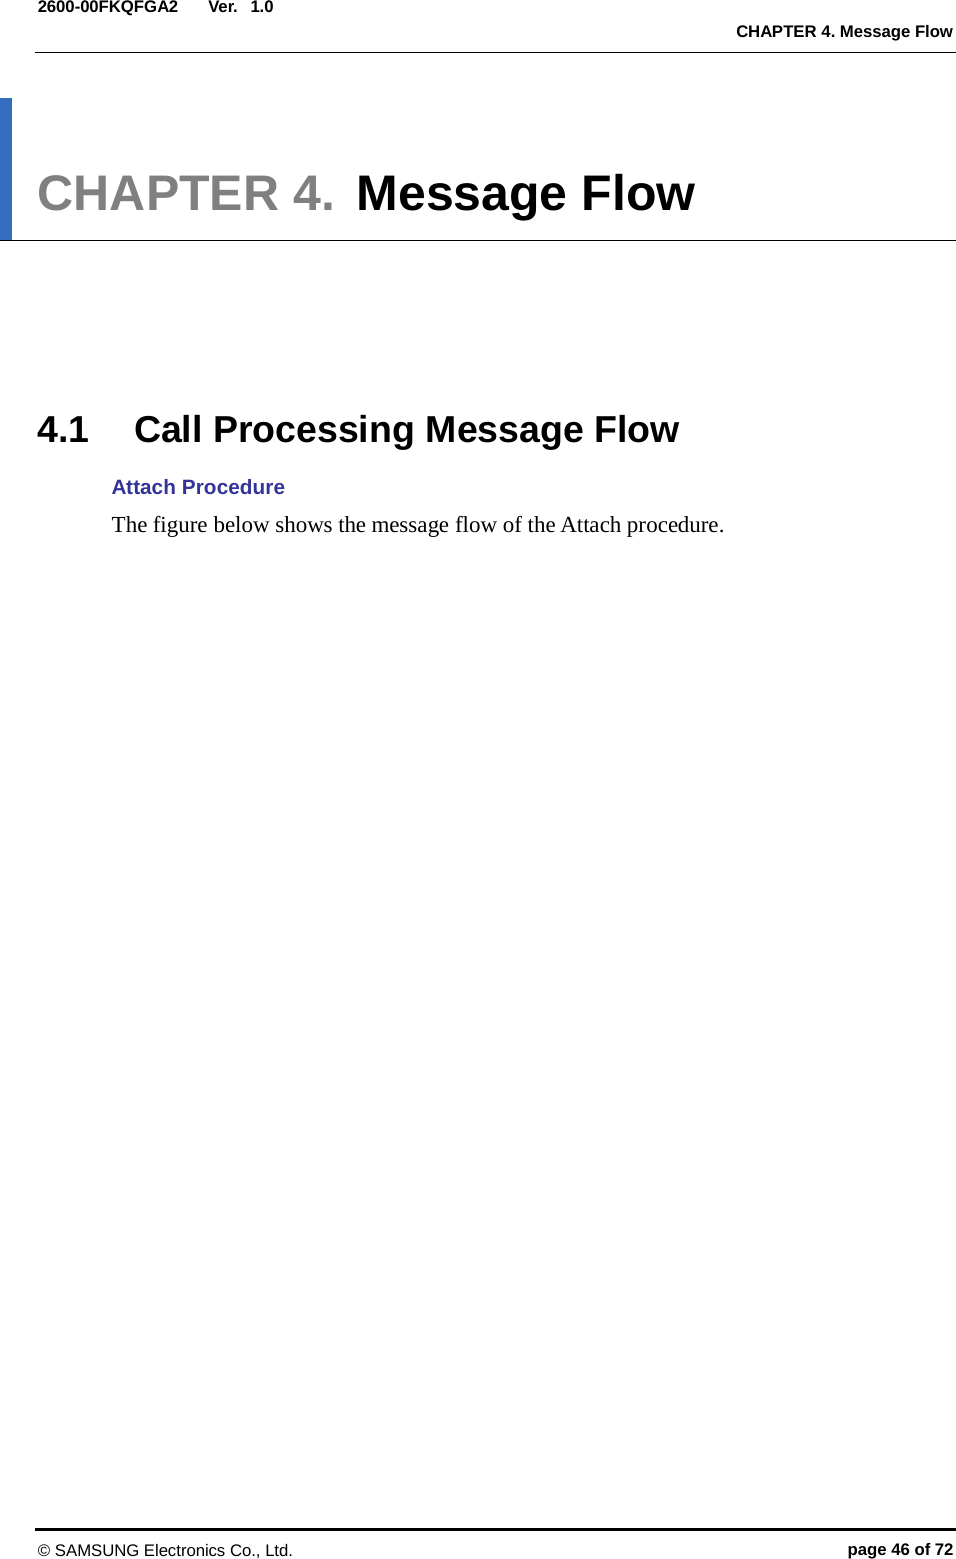  Ver.  CHAPTER 4. Message Flow 2600-00FKQFGA2 1.0 CHAPTER 4. Message Flow      4.1 Call Processing Message Flow   Attach Procedure The figure below shows the message flow of the Attach procedure.   © SAMSUNG Electronics Co., Ltd. page 46 of 72 